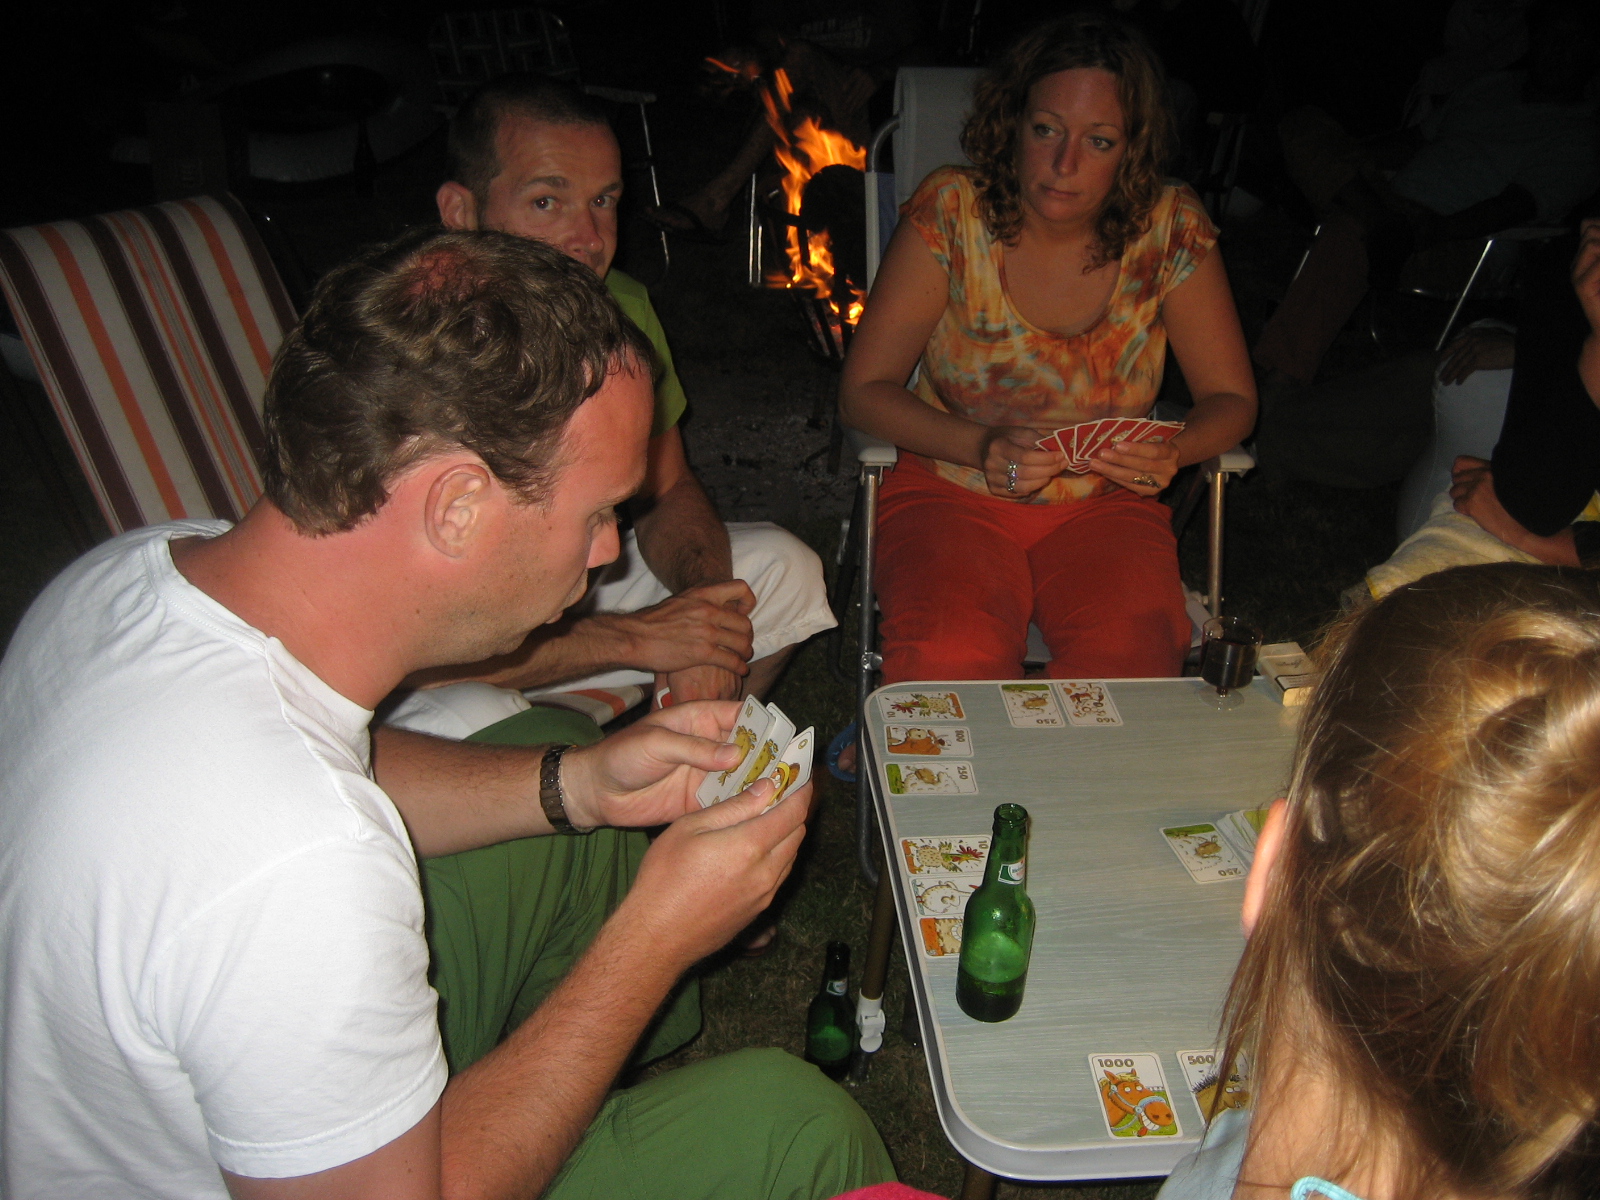 four people are sitting around playing cards